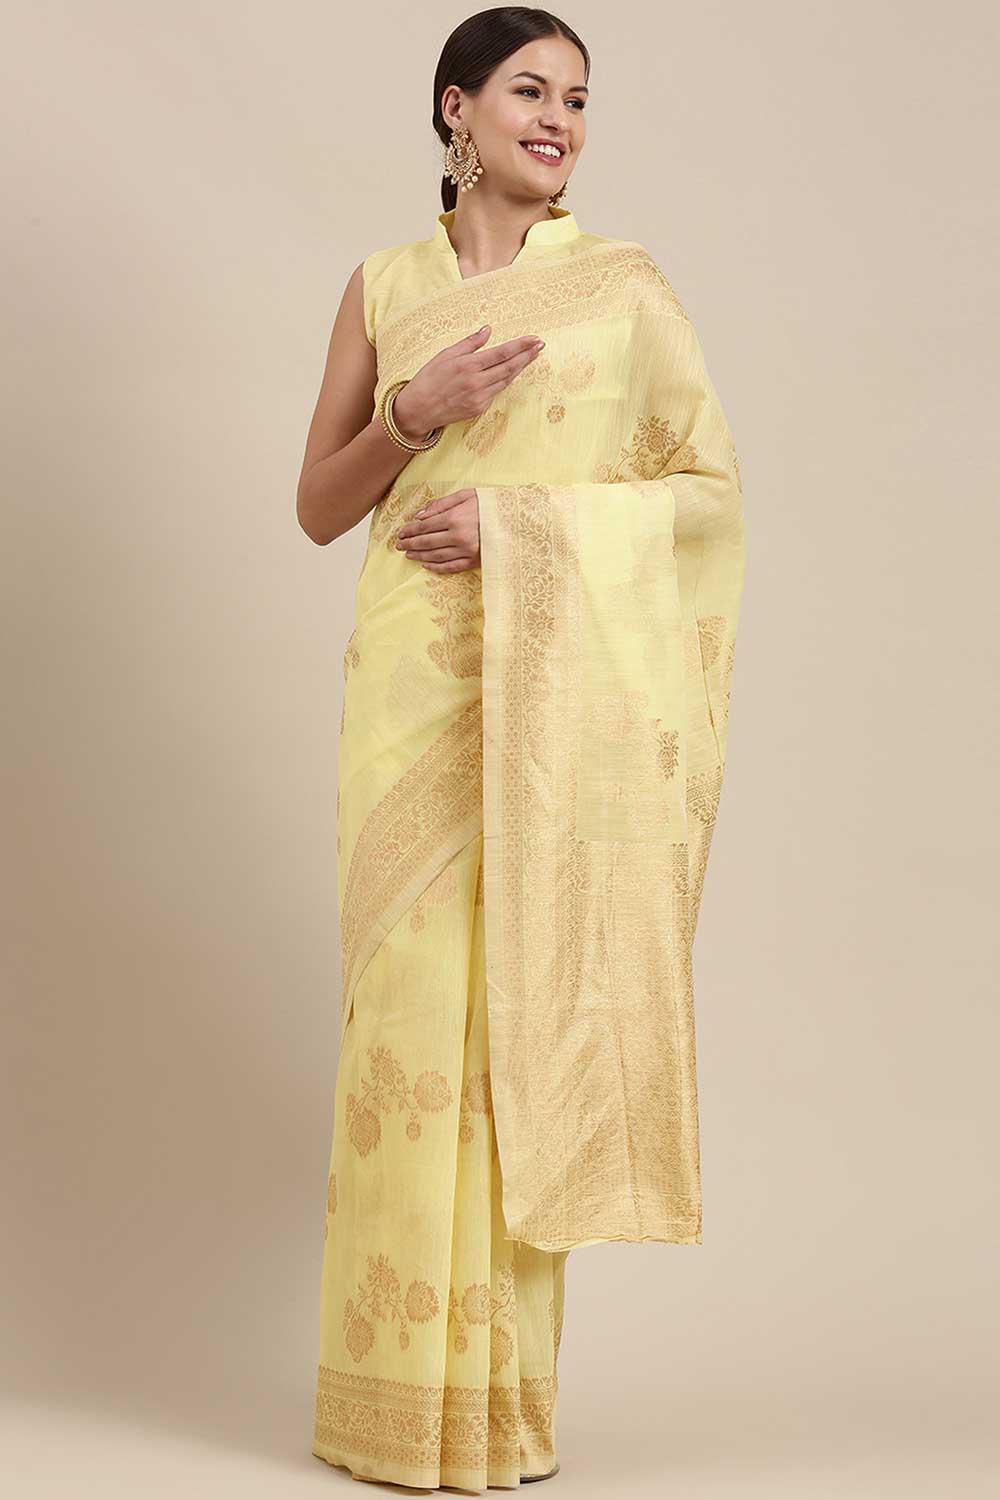 Lori Lemon Yellow Floral Woven Blended Linen One Minute Saree